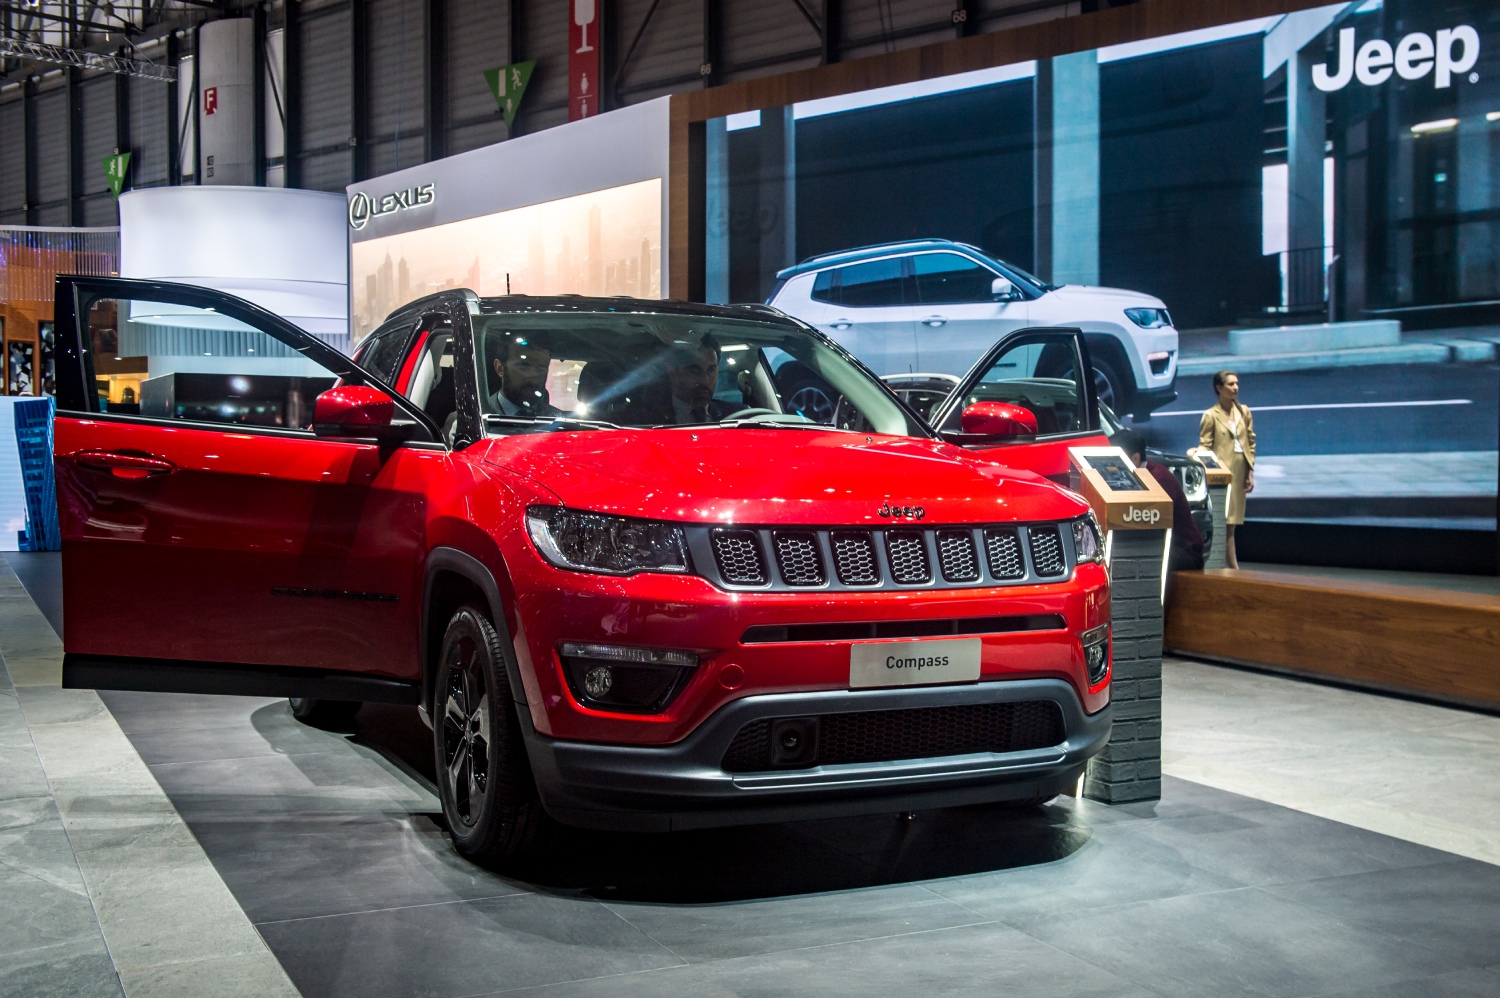 Used cars that are no longer affordable start with the Jeep Compass